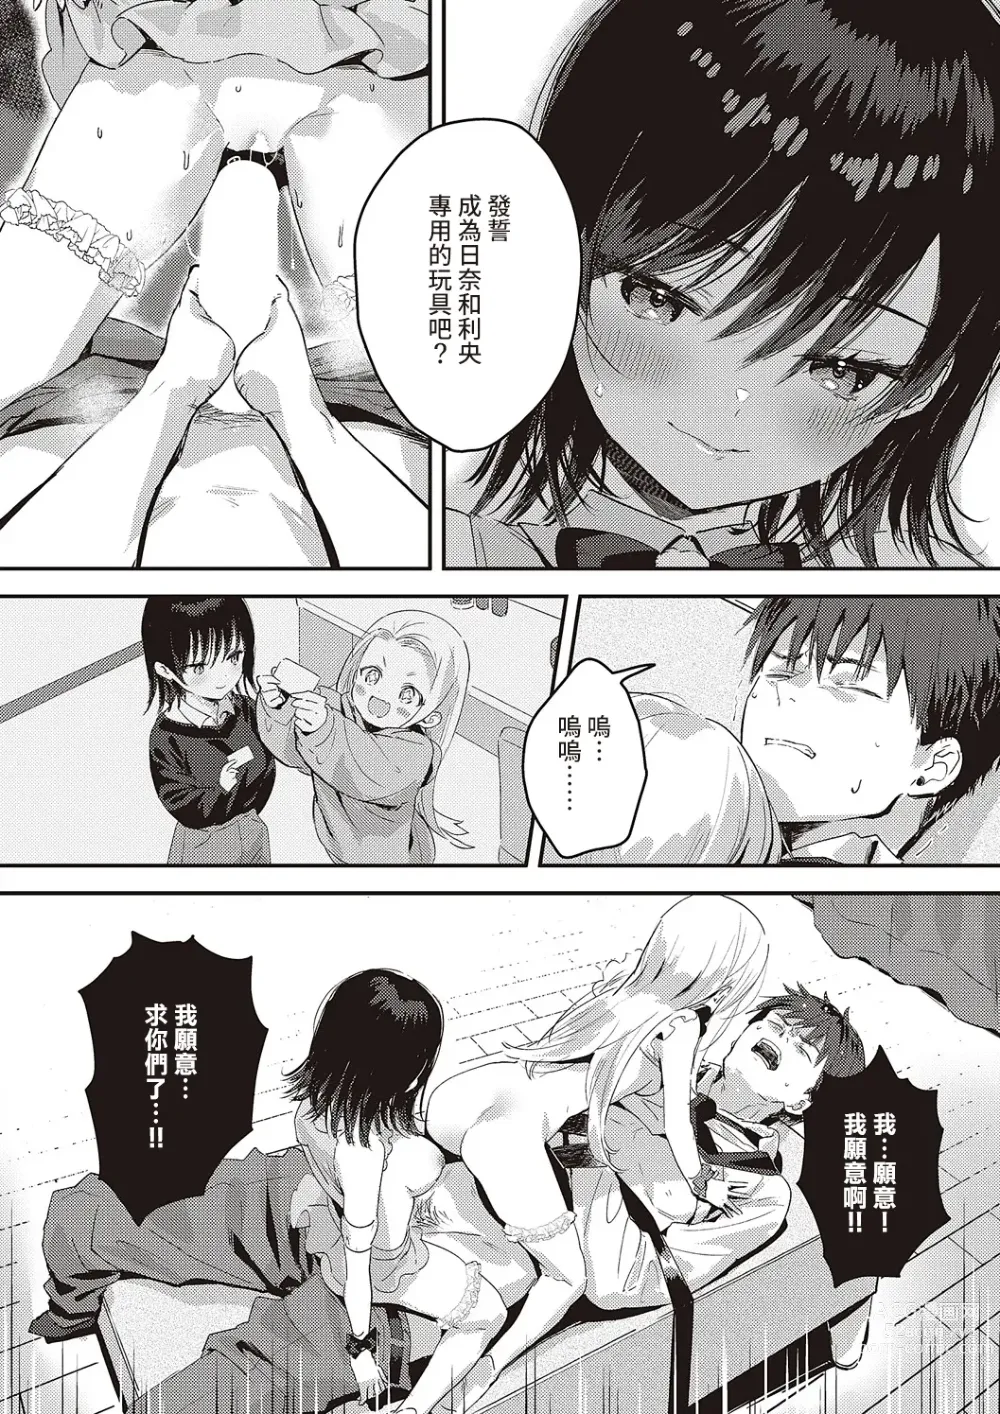 Page 20 of manga BACK STAGE